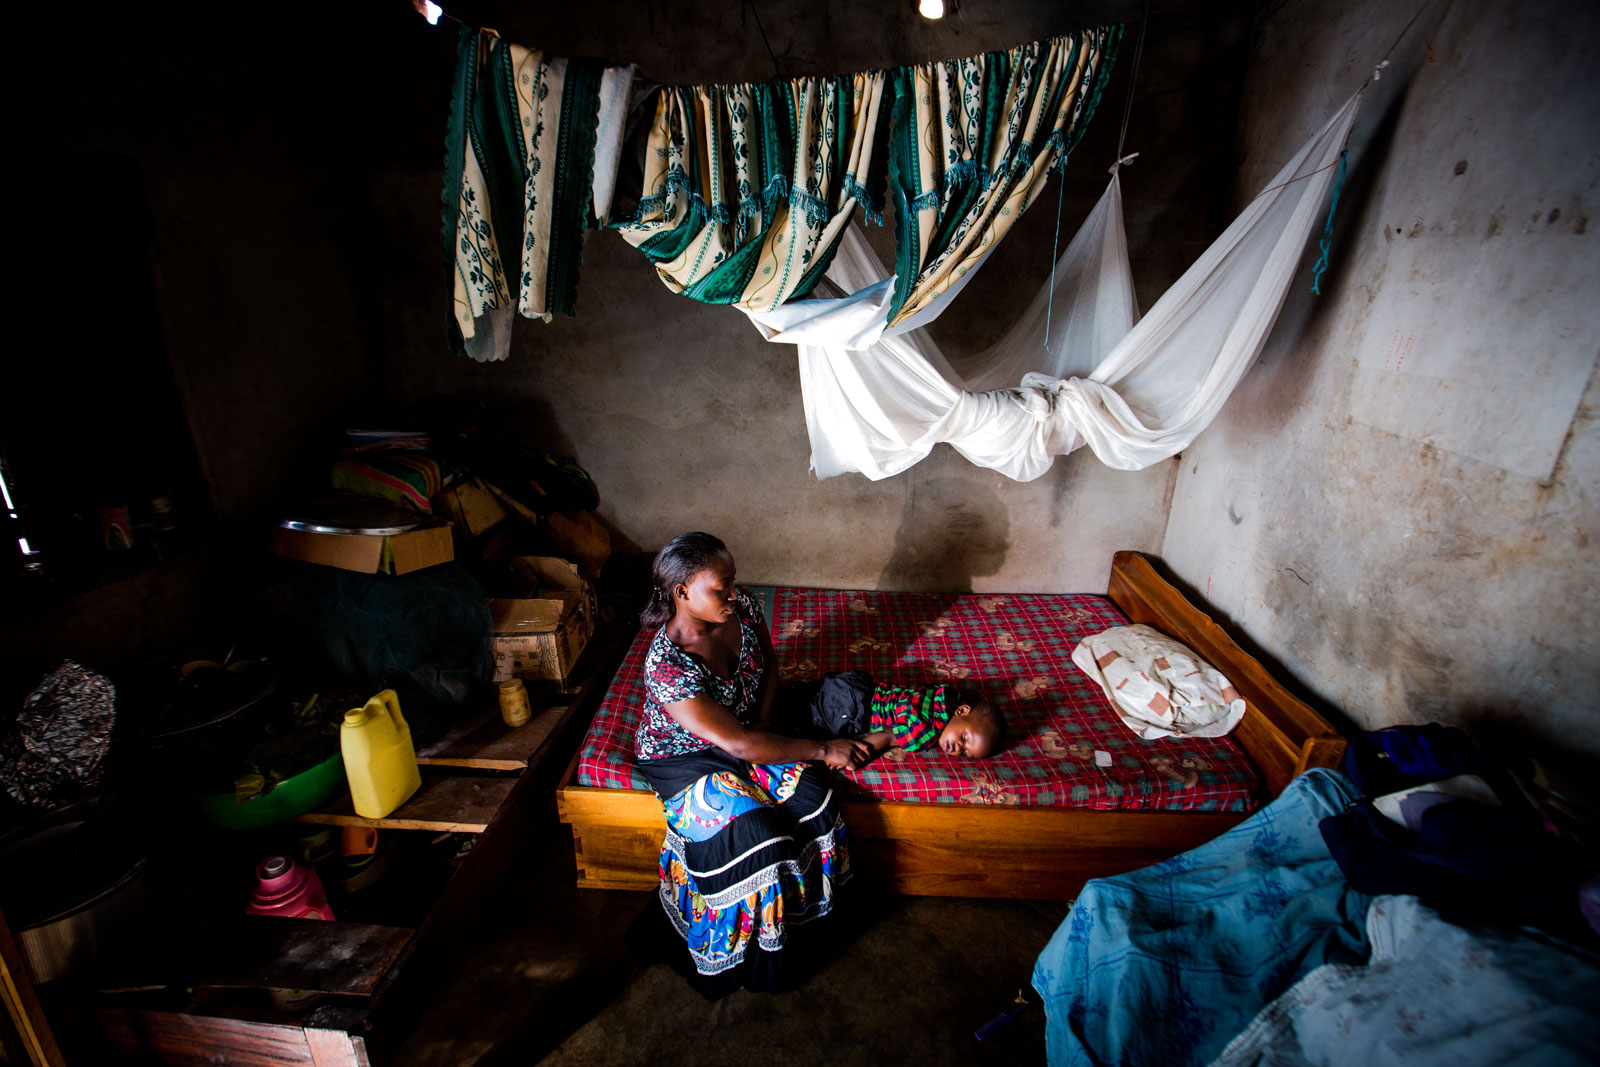 25 Stunning Photos of Rooms in the Developing World